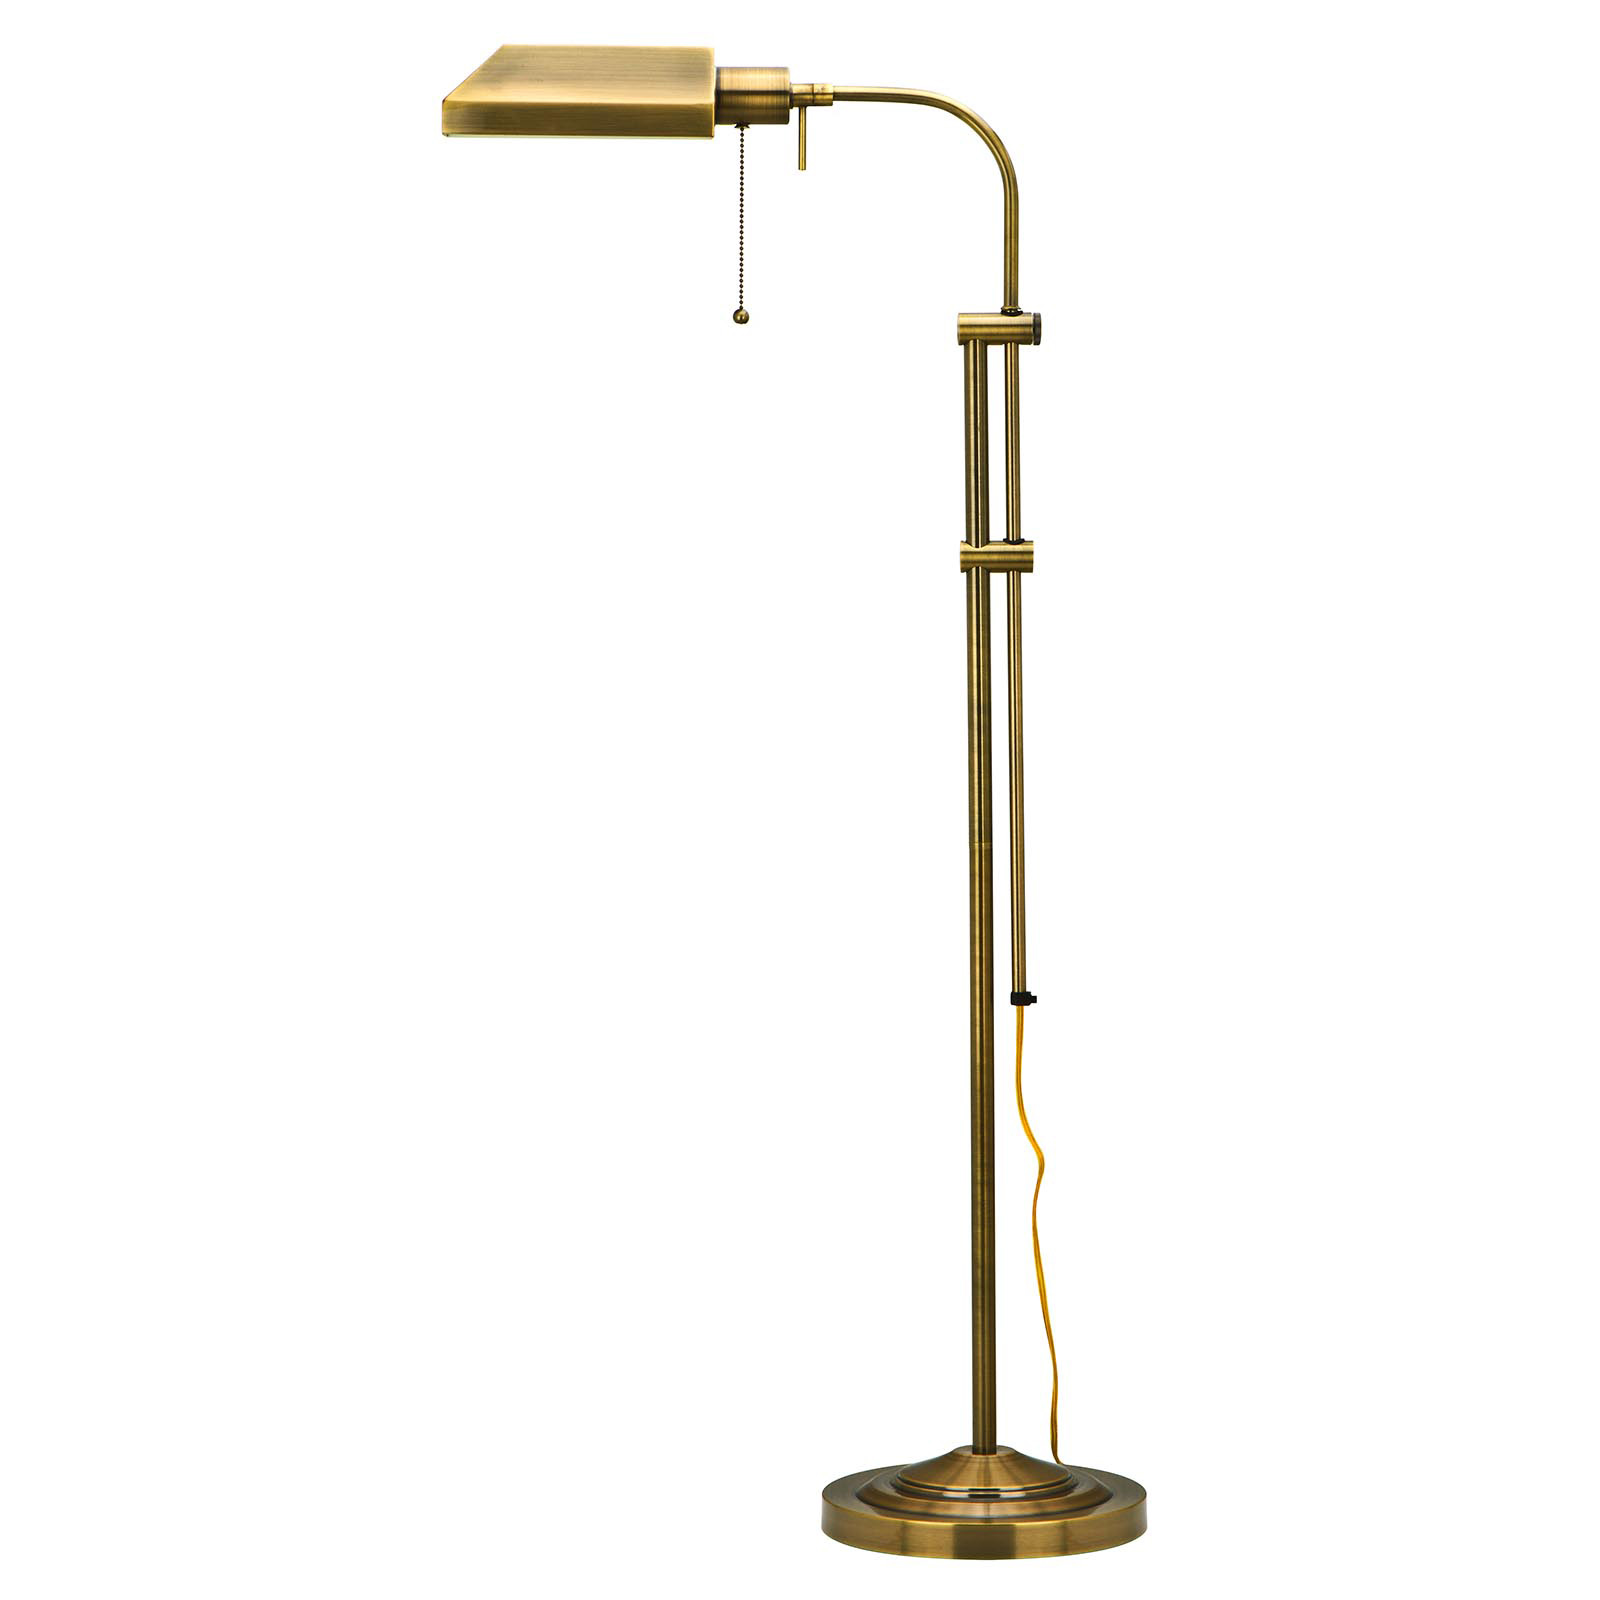 Picture of Cal Lighting BO-117FL-AB 100 W Pharmacy Floor Lamp With No Shades- Antique Bronze Finish